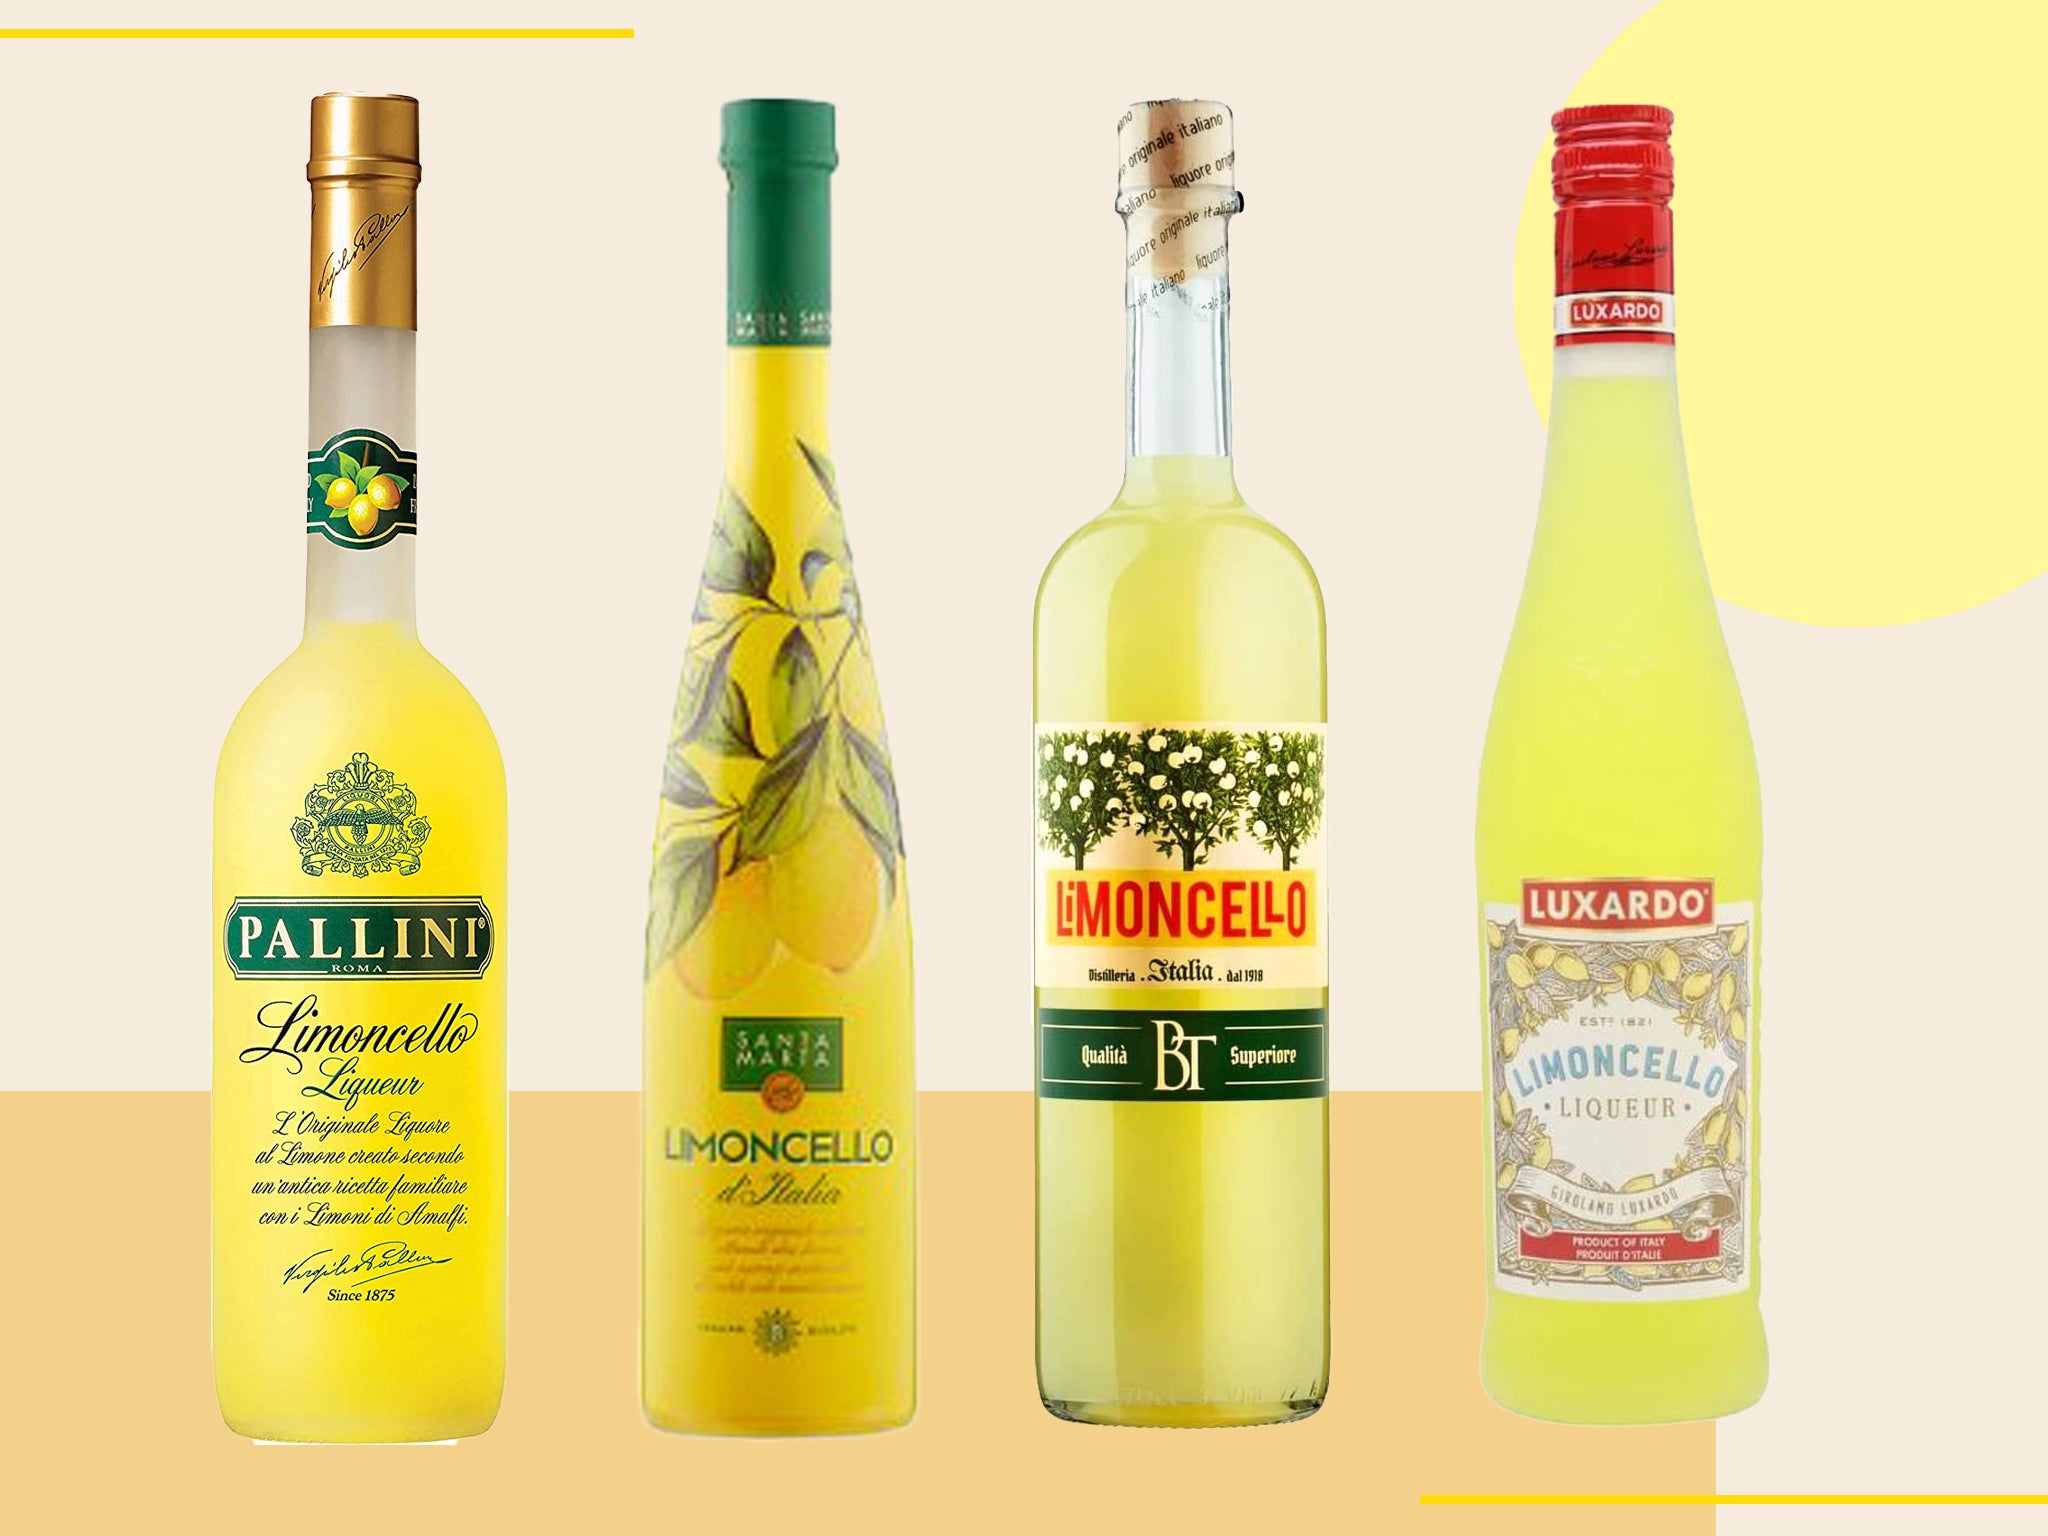 Serve the digestif in an ice-cold glass, over ice or as part of the refreshing limoncello spritz